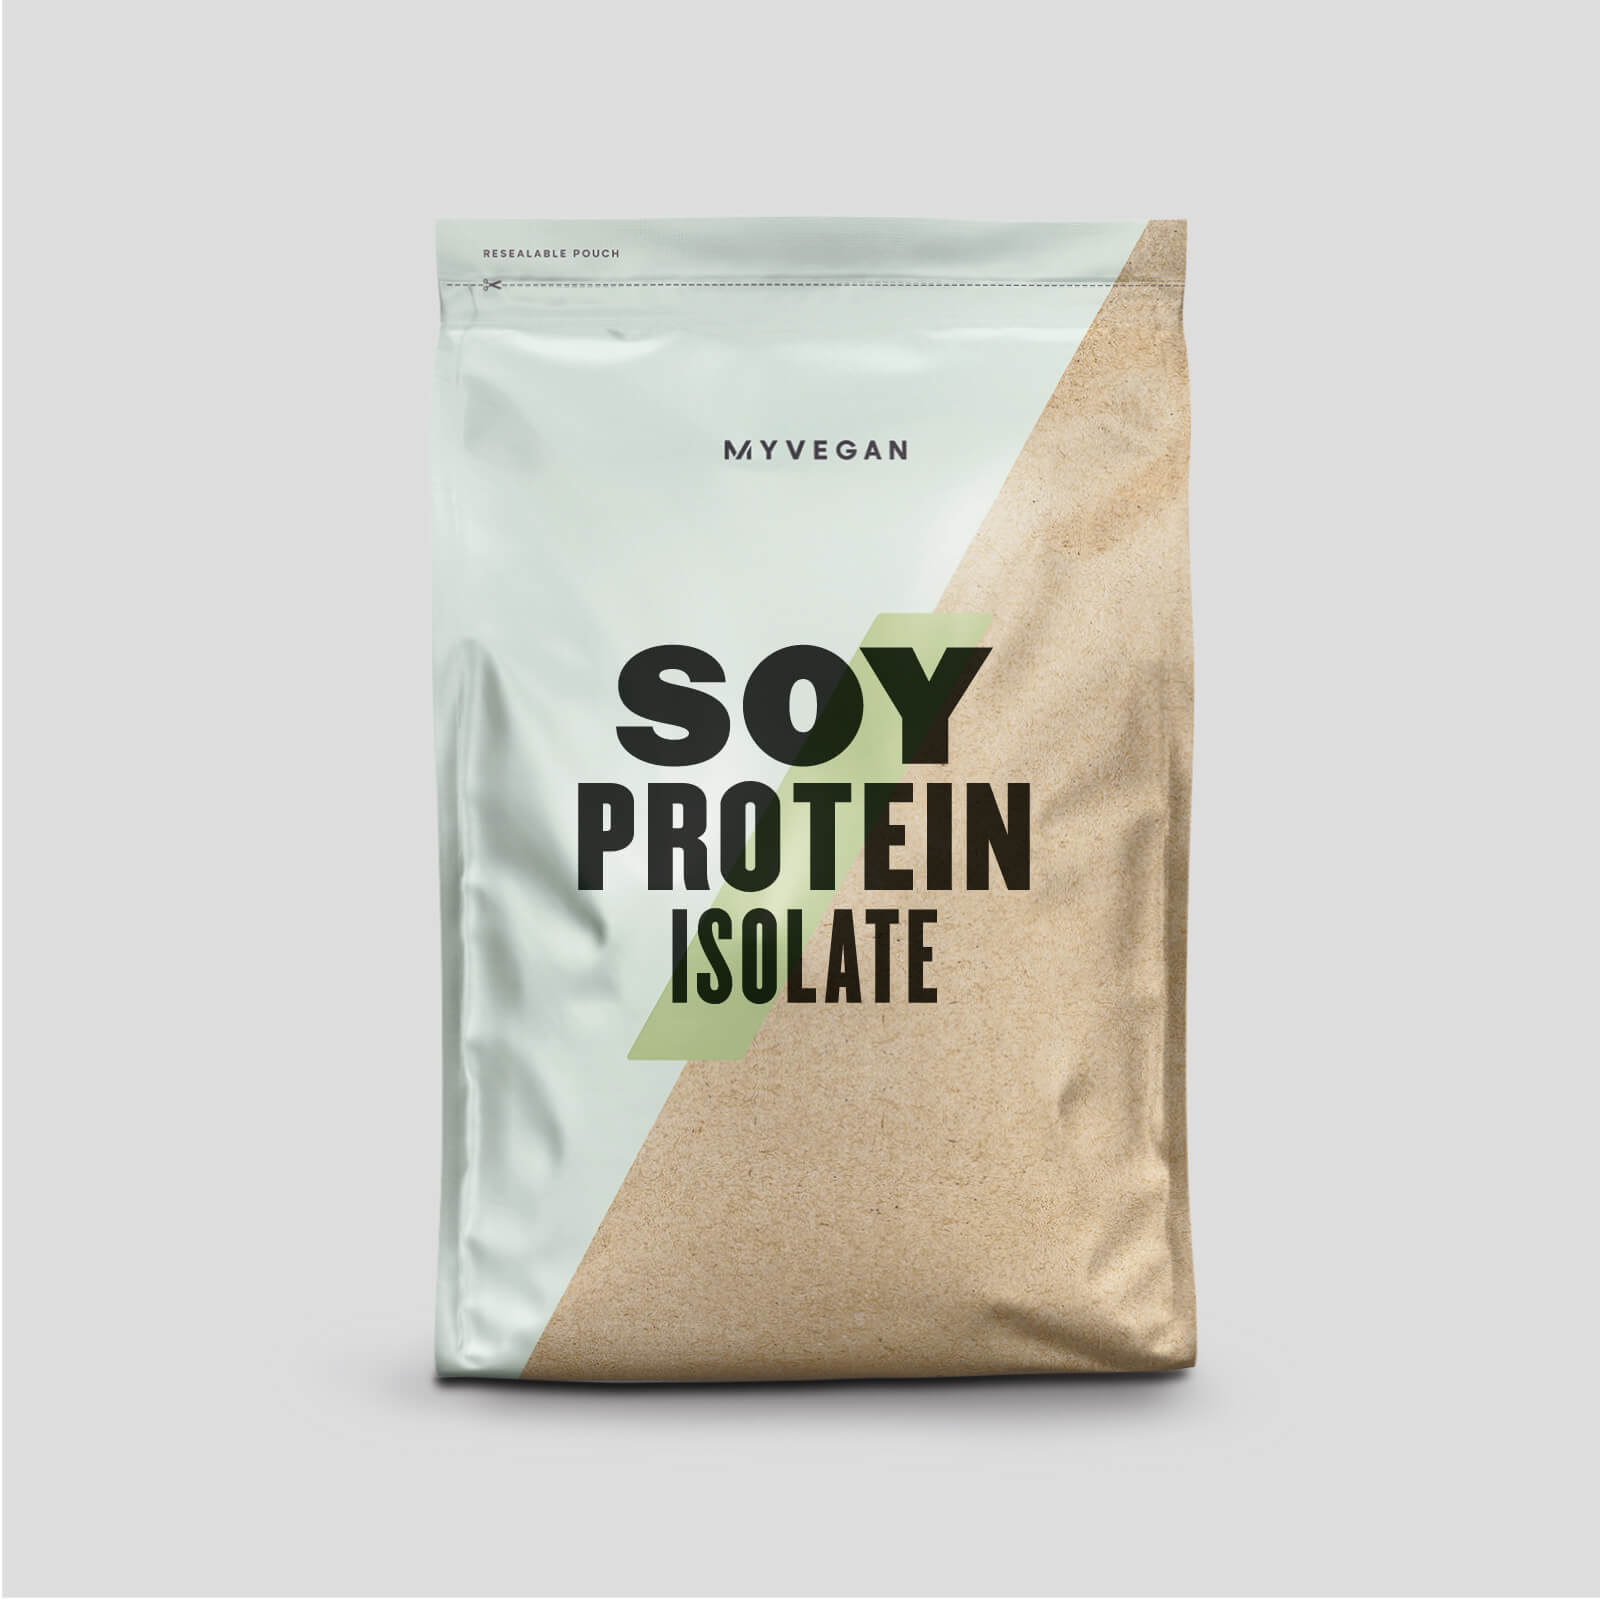 Myprotein Soy Protein Isolate - 1kg - Natural Strawberry